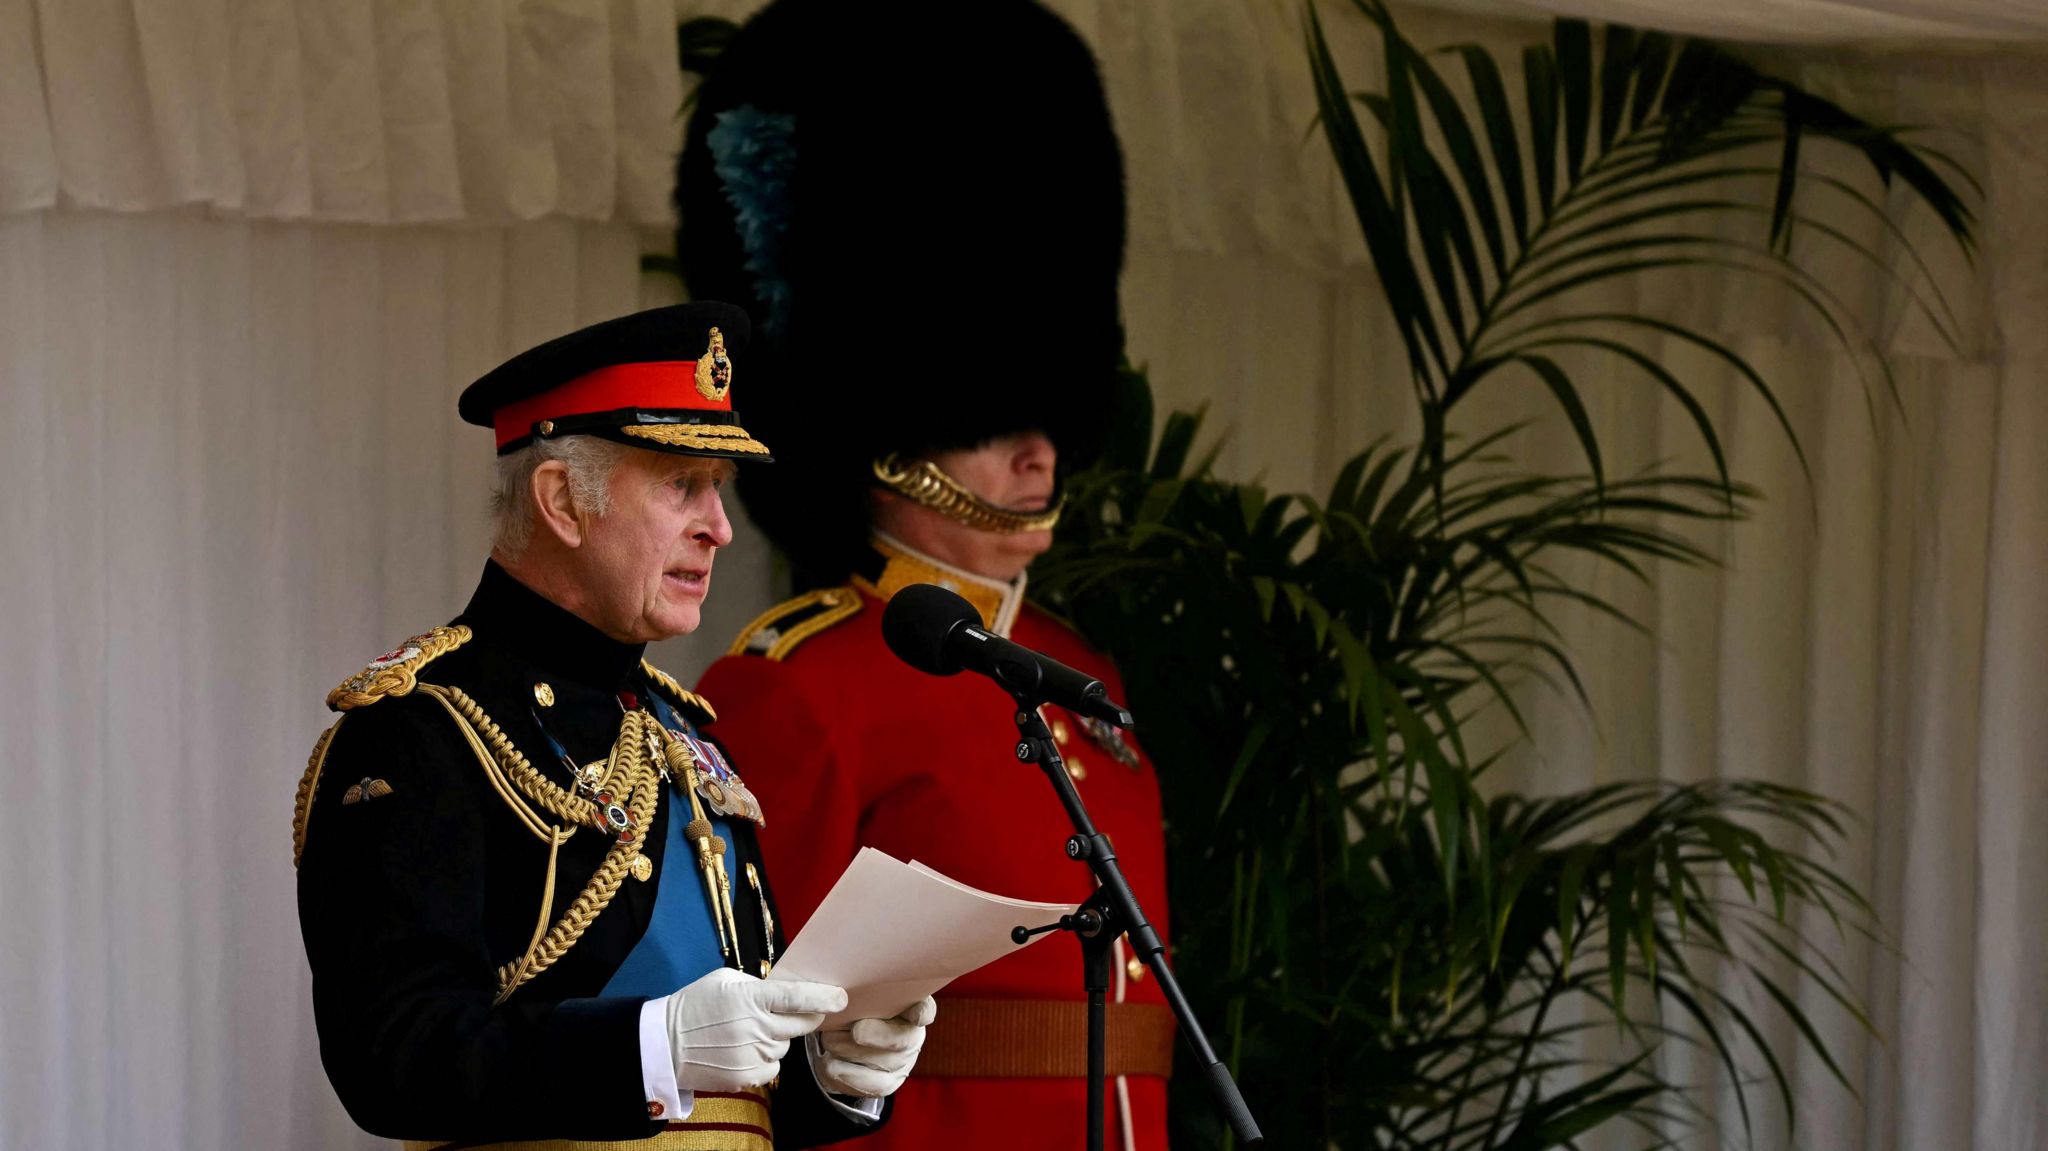 King Charles gives a speech at Windsor Castle